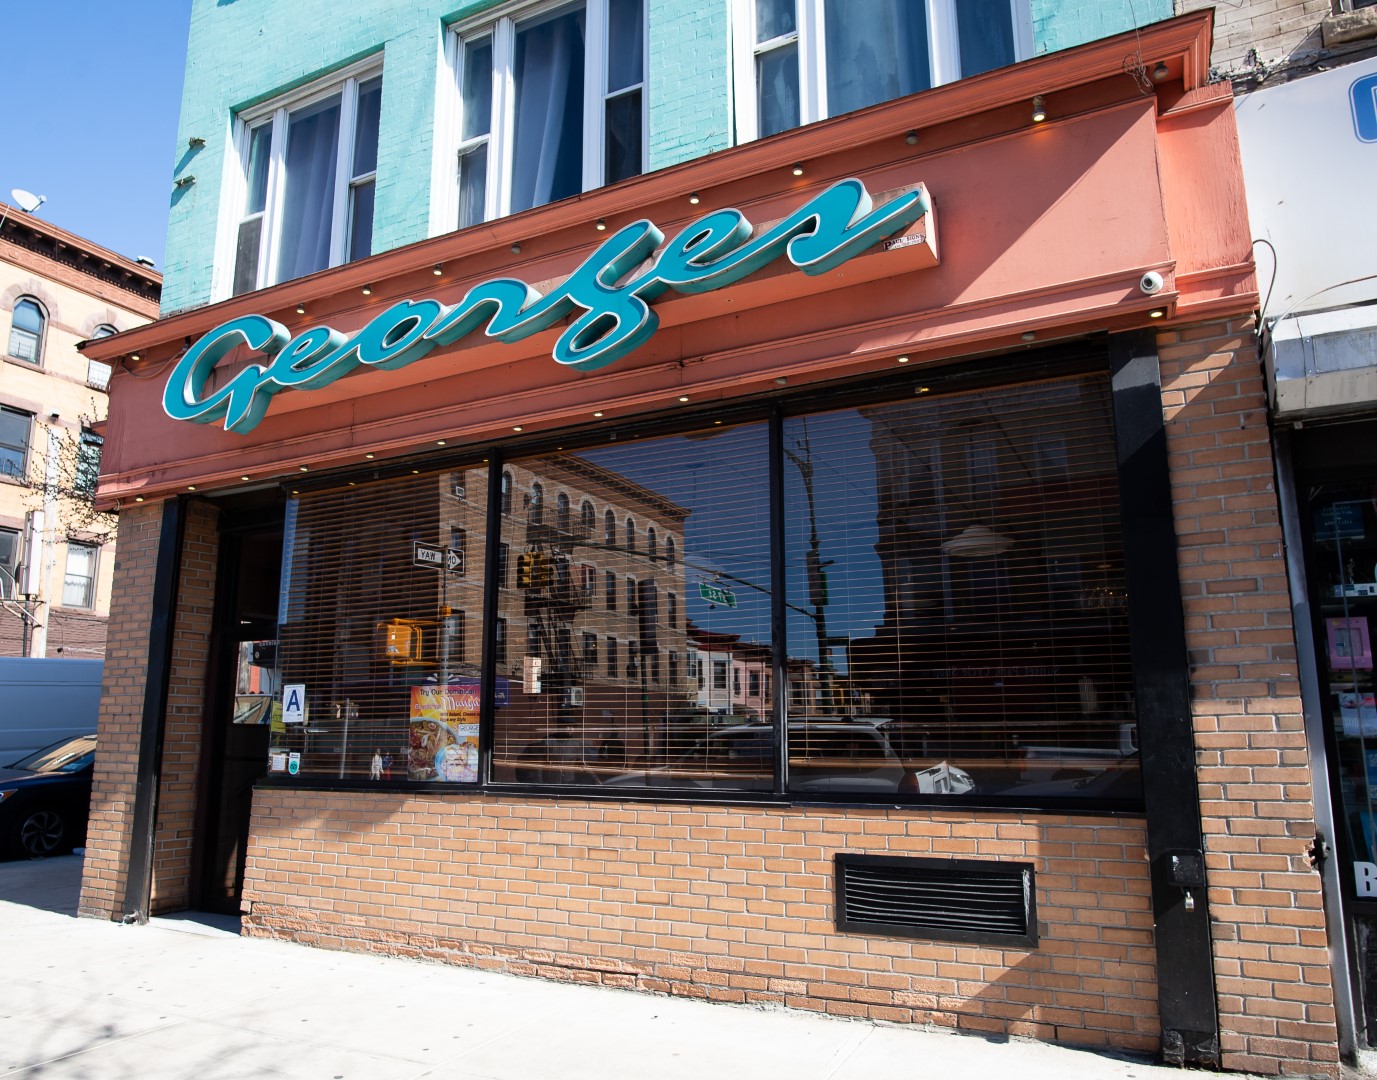 Exterior view of george's, a restaurant with a teal neon sign above large windowed facade reflecting the street, set in a brick building with a blue-green upper section.